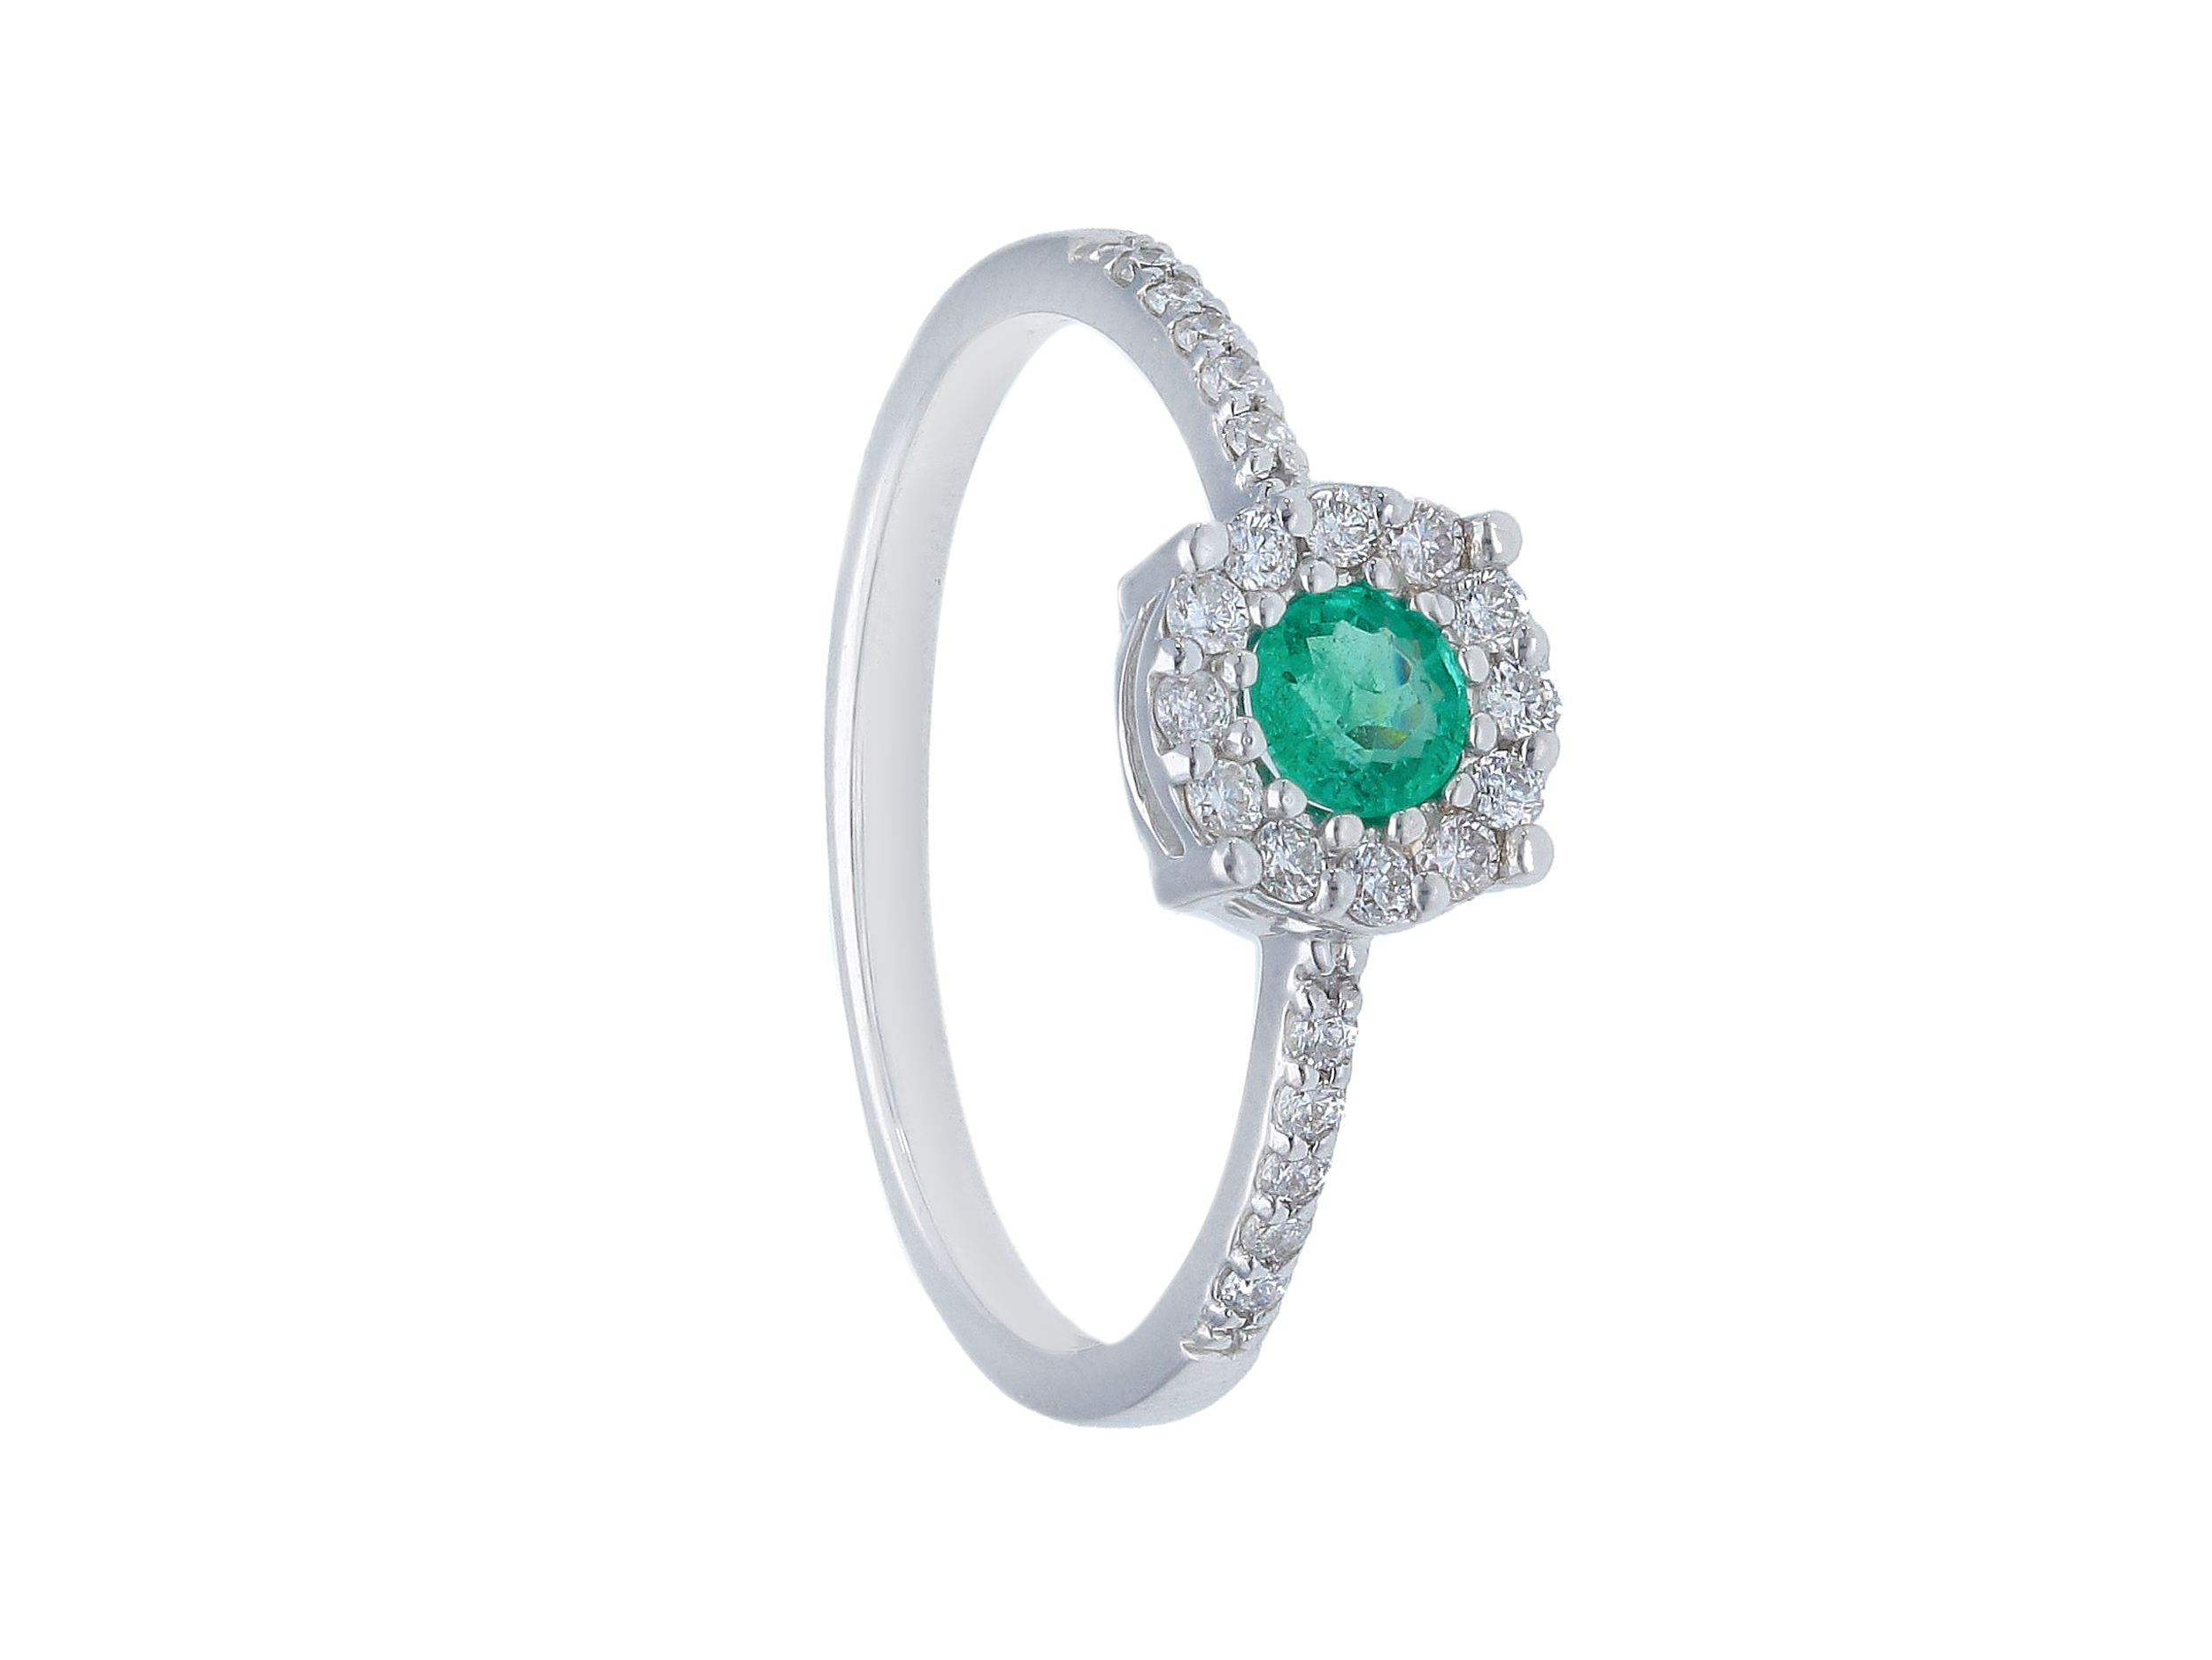 Emerald and diamond ring in gold 750% BELLE EPOQUE Art. 264857SB